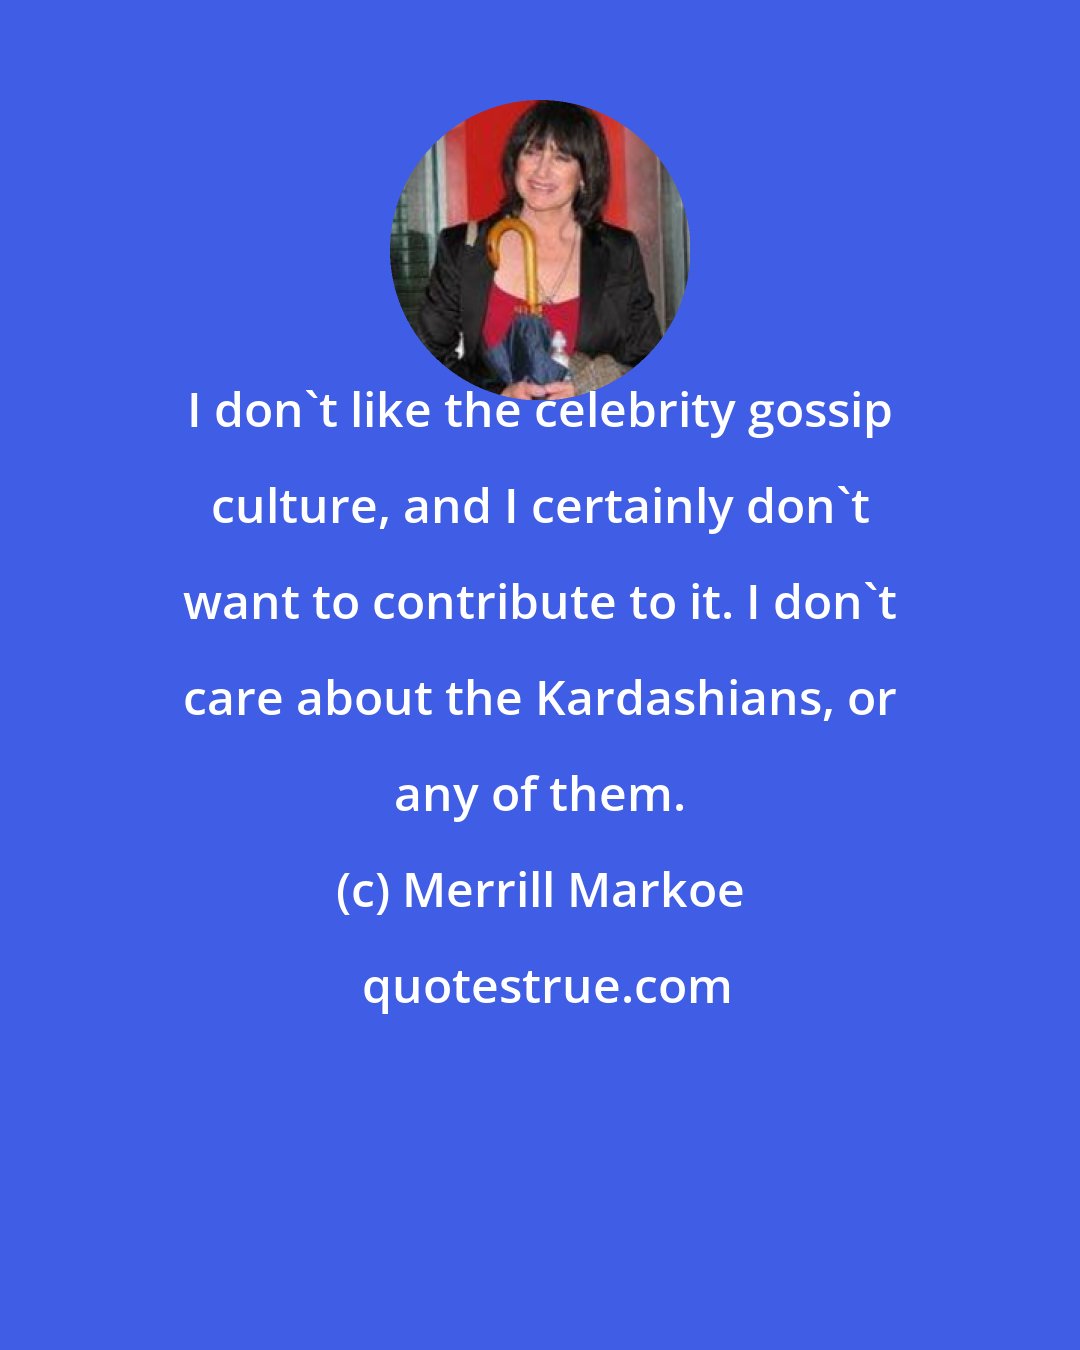 Merrill Markoe: I don't like the celebrity gossip culture, and I certainly don't want to contribute to it. I don't care about the Kardashians, or any of them.